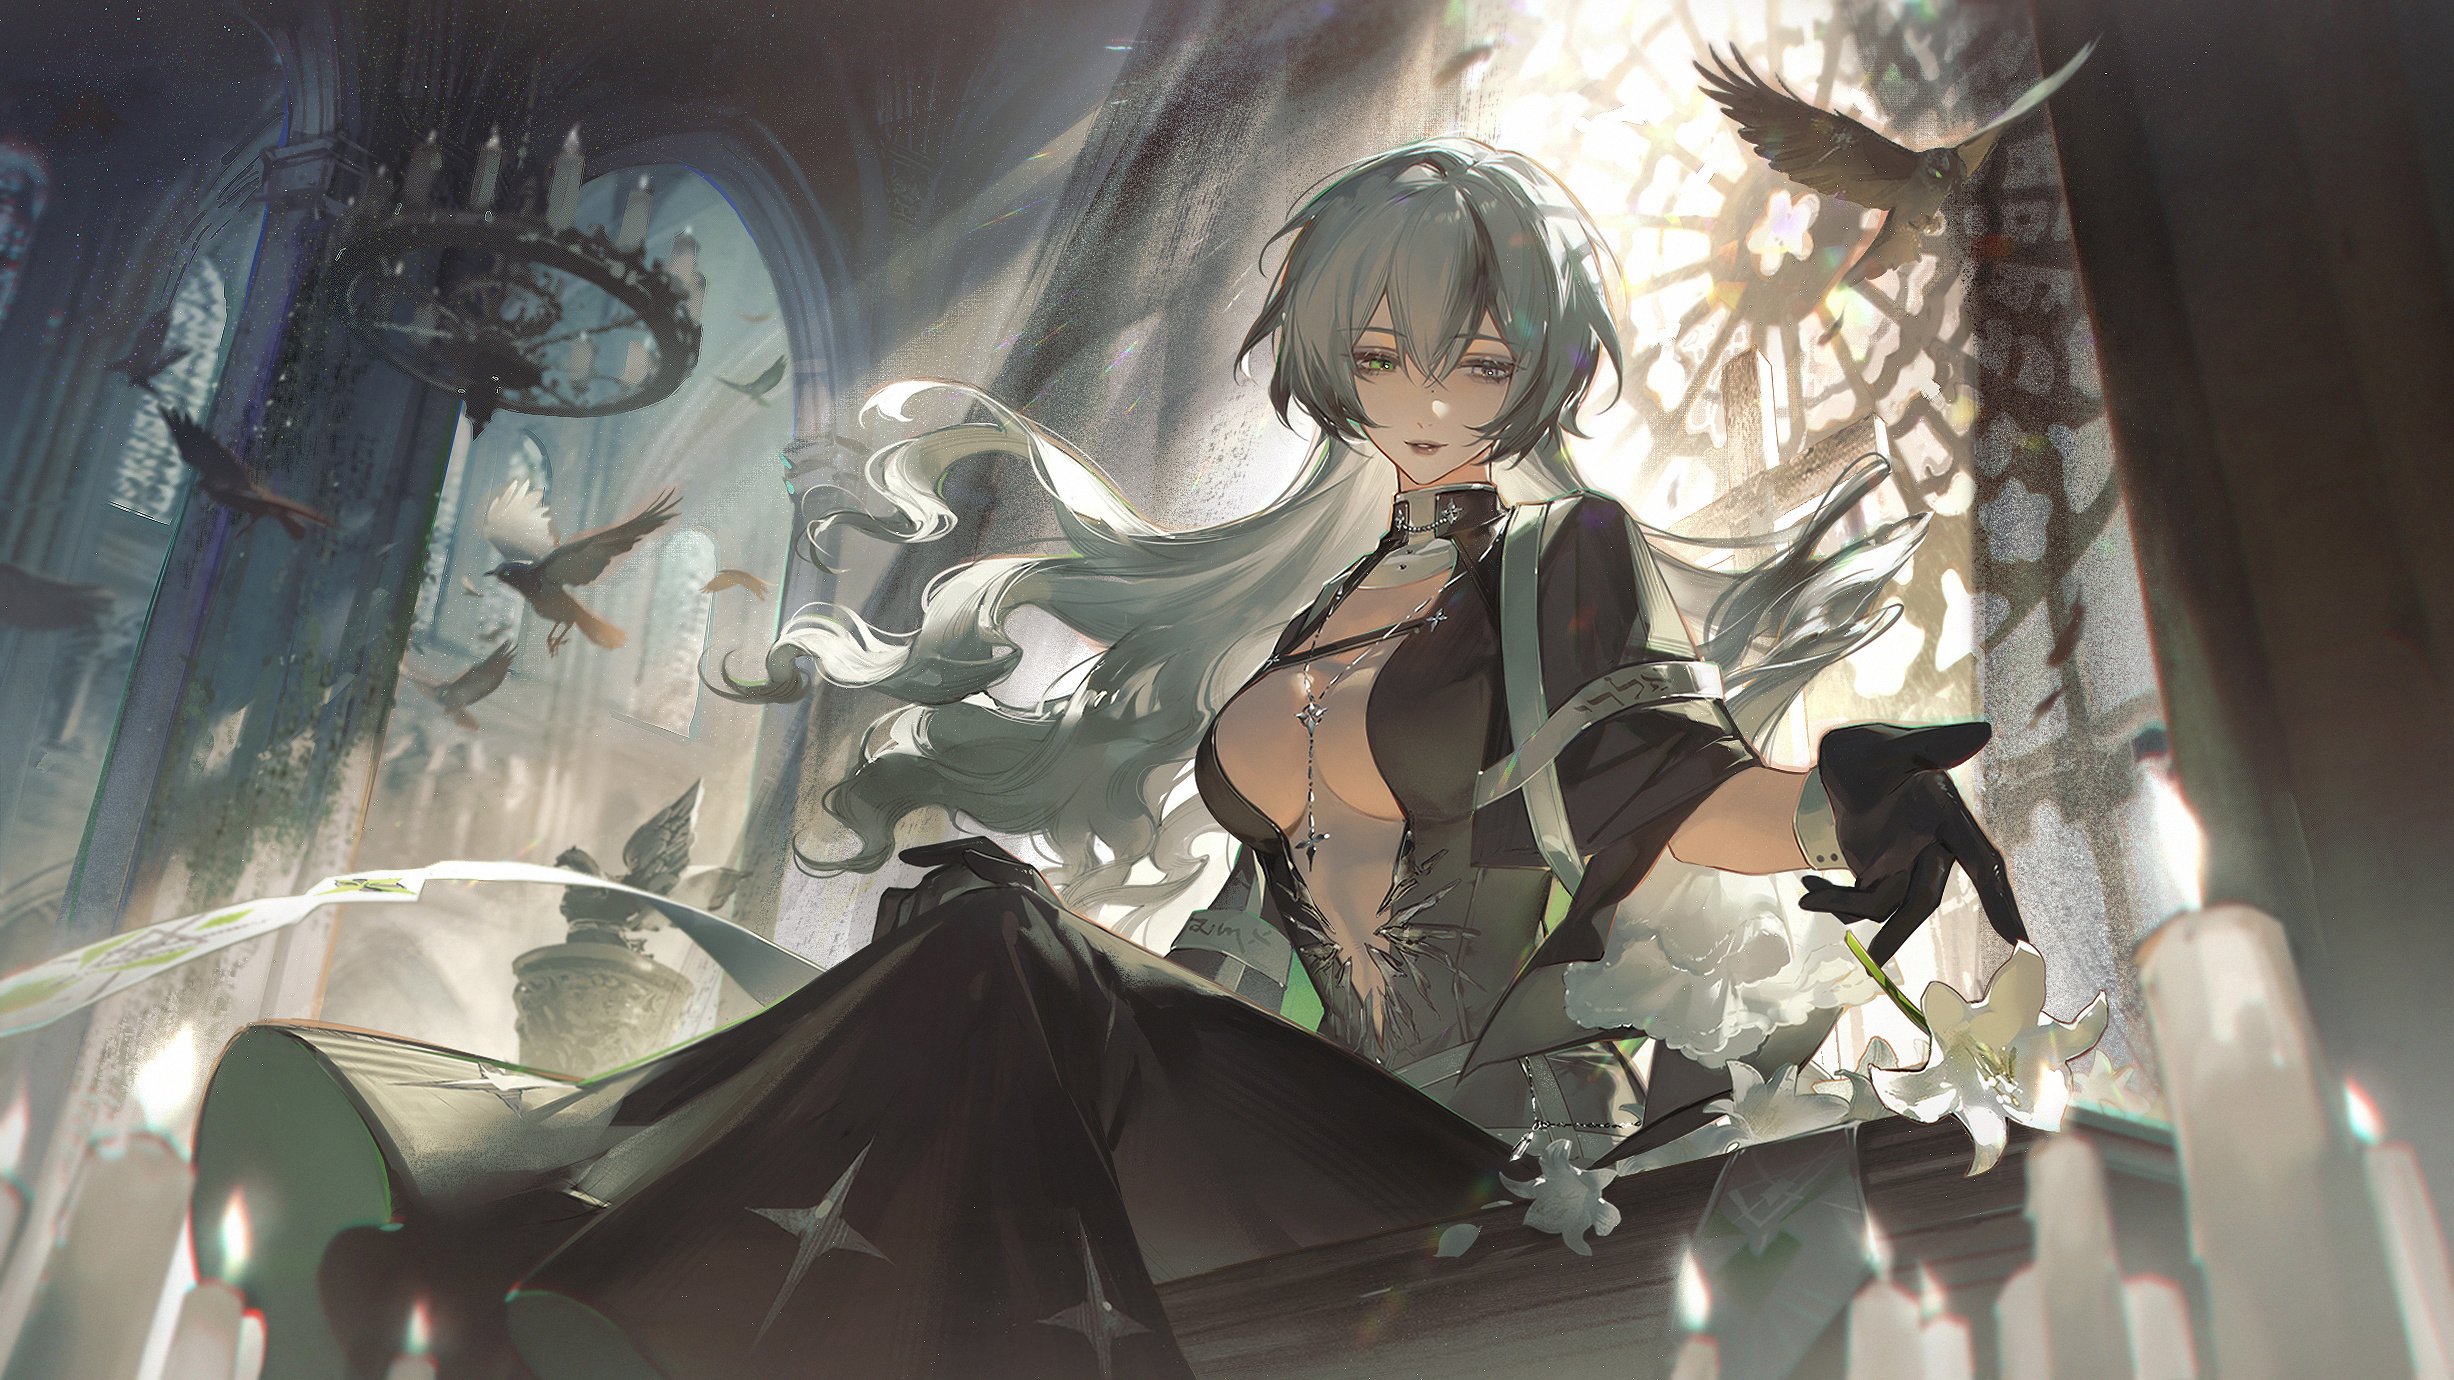 Path To Nowhere Anime Girls Necklace Birds Candles Gloves 2454x1380